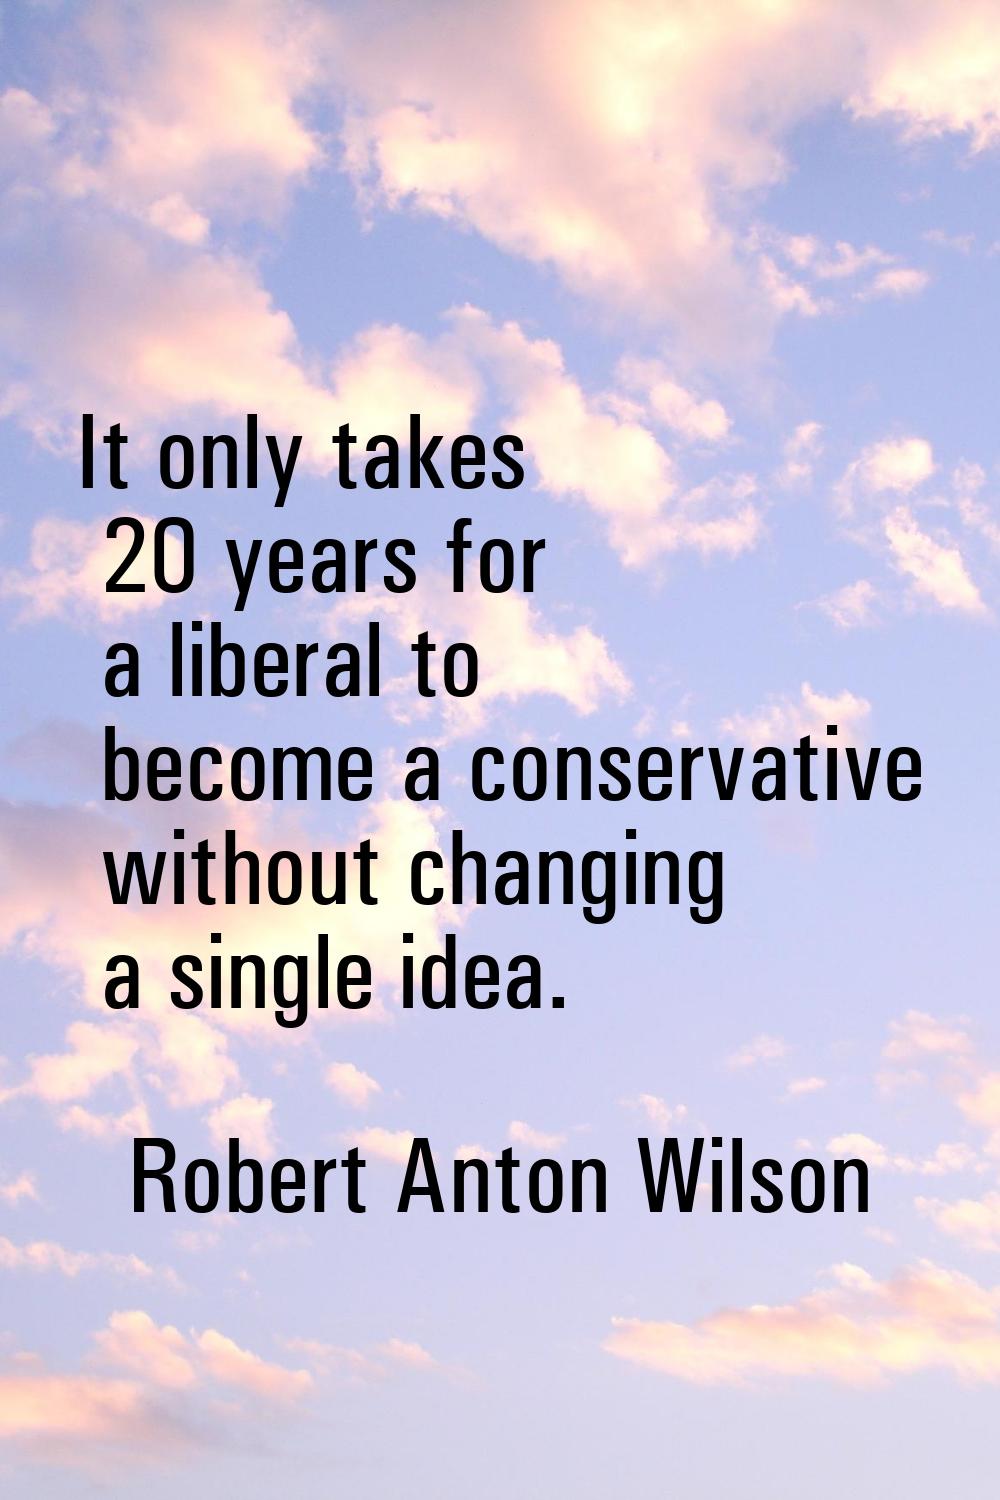 It only takes 20 years for a liberal to become a conservative without changing a single idea.